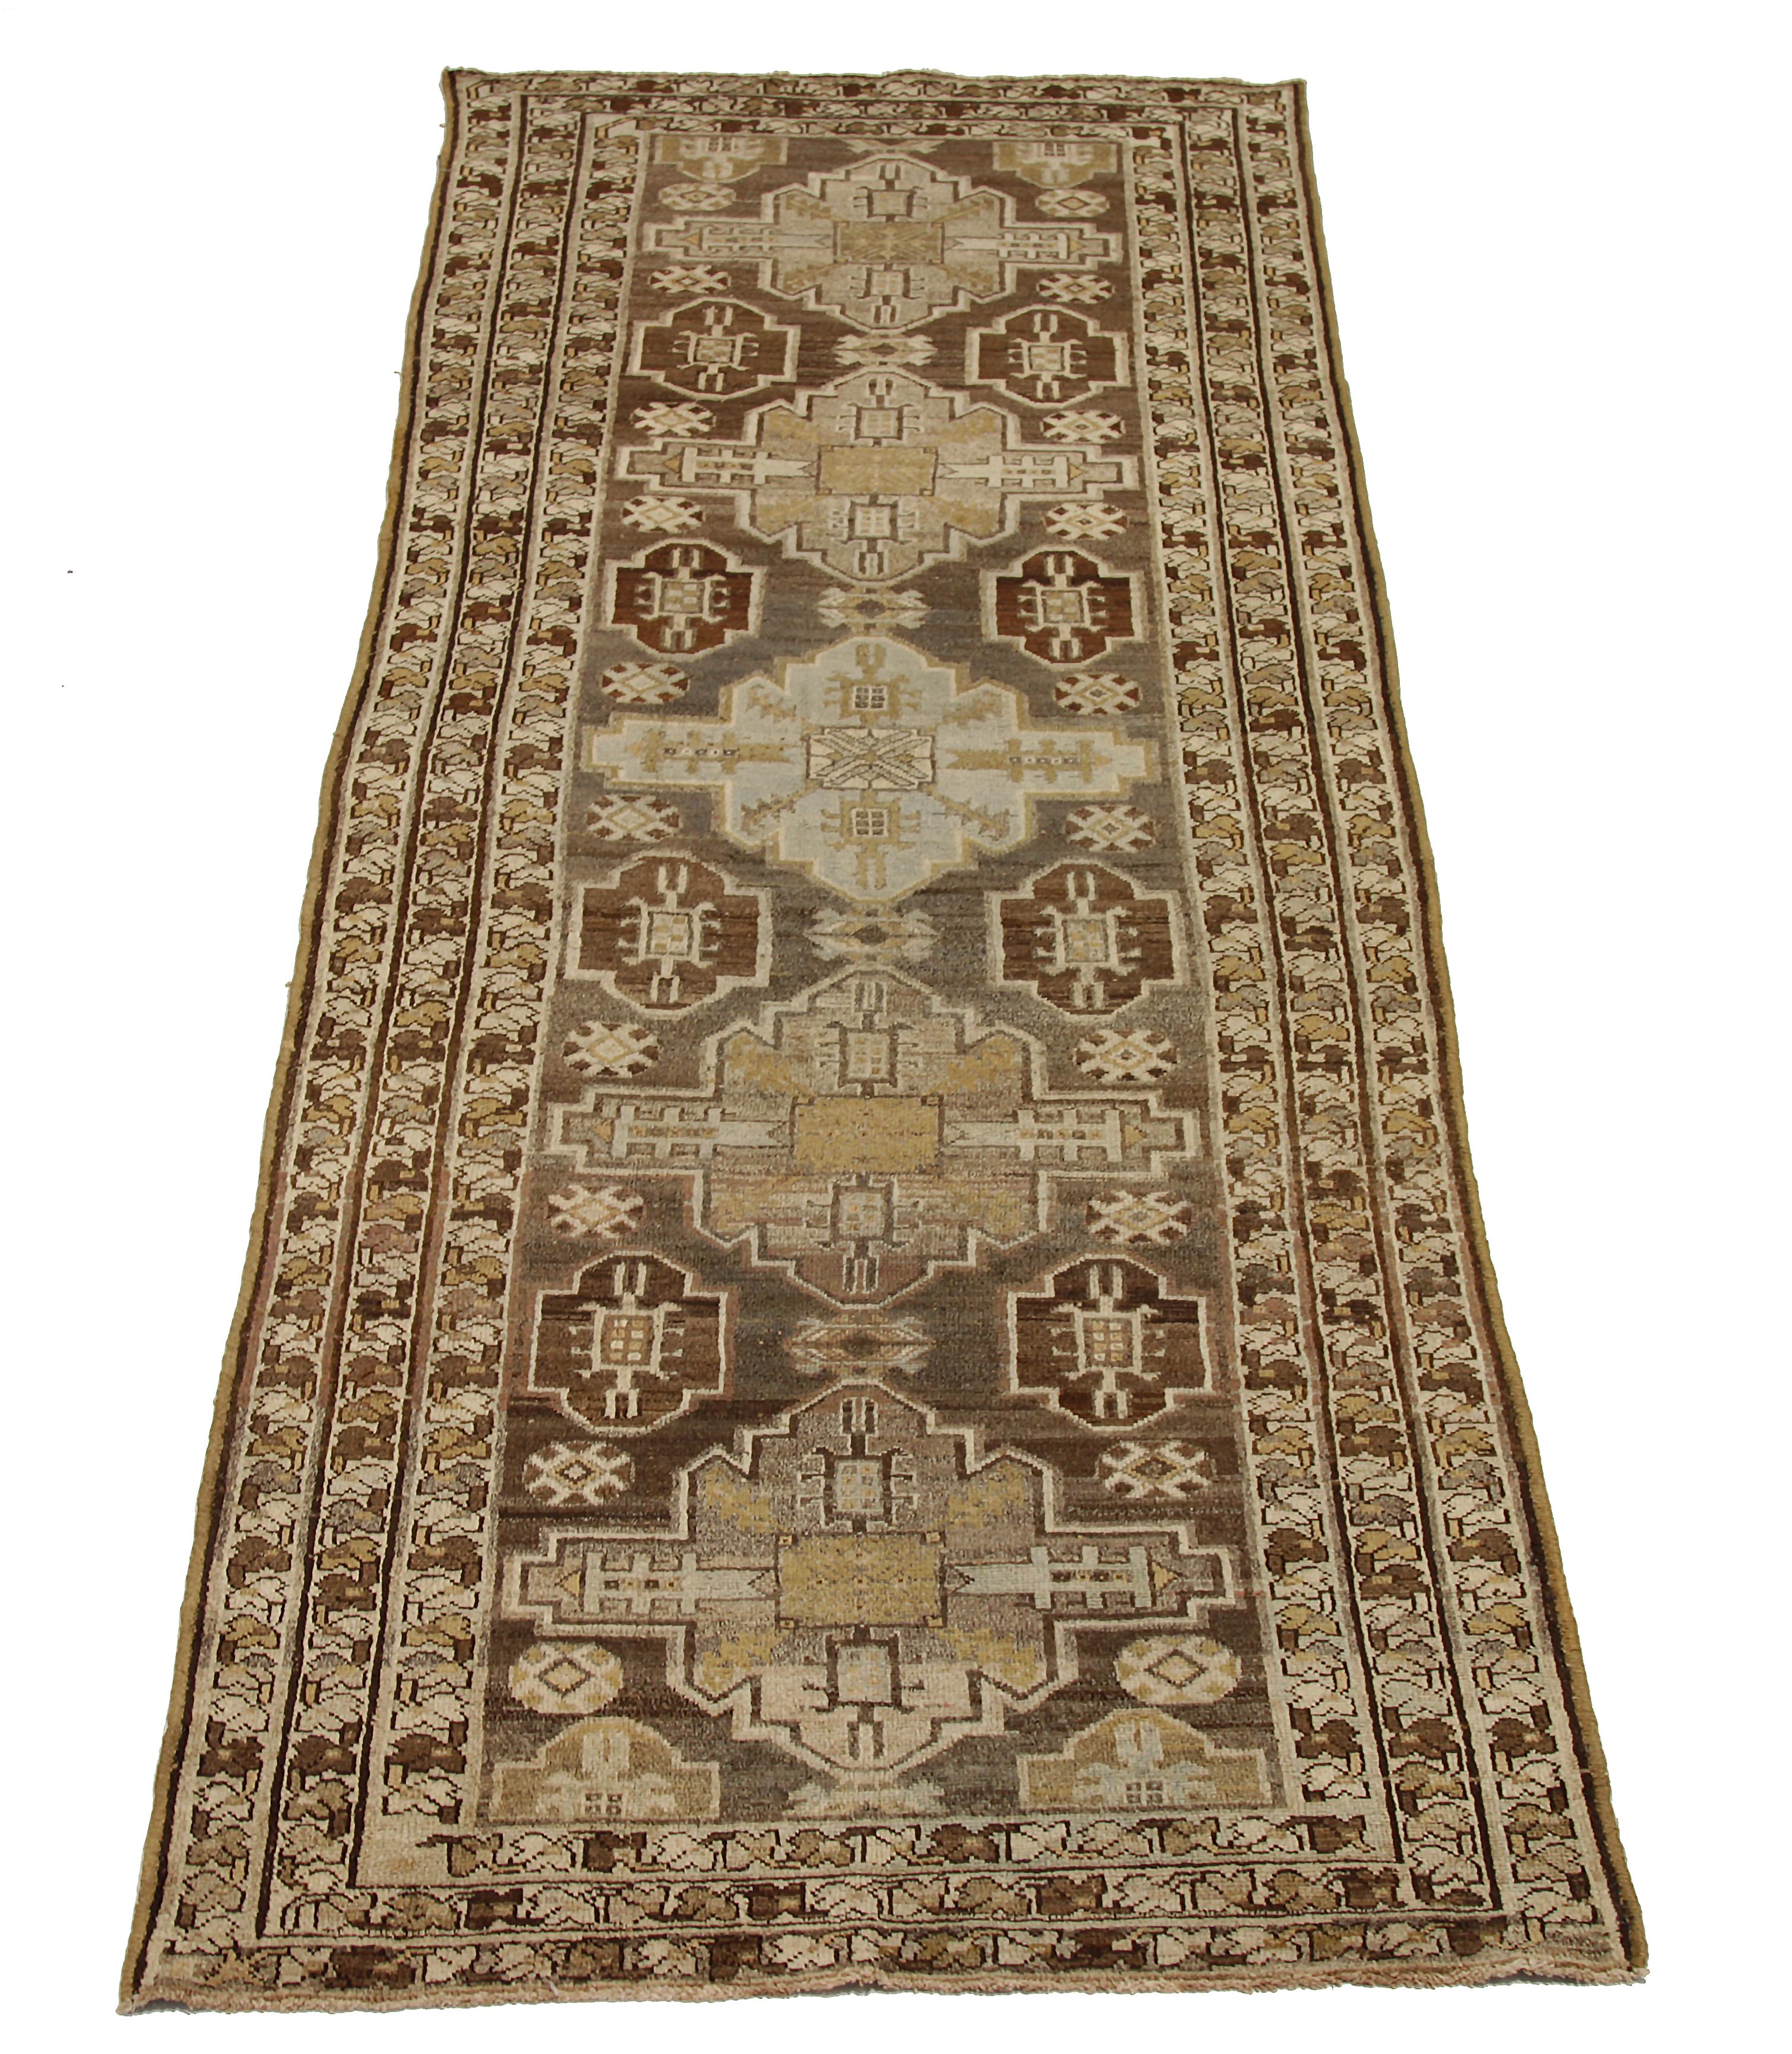 Antique Persian runner rug handwoven from the finest sheep’s wool. It’s colored with all-natural vegetable dyes that are safe for humans and pets. It’s a traditional Saveh design featuring geometric and tribal designs on a brown field. It’s a lovely